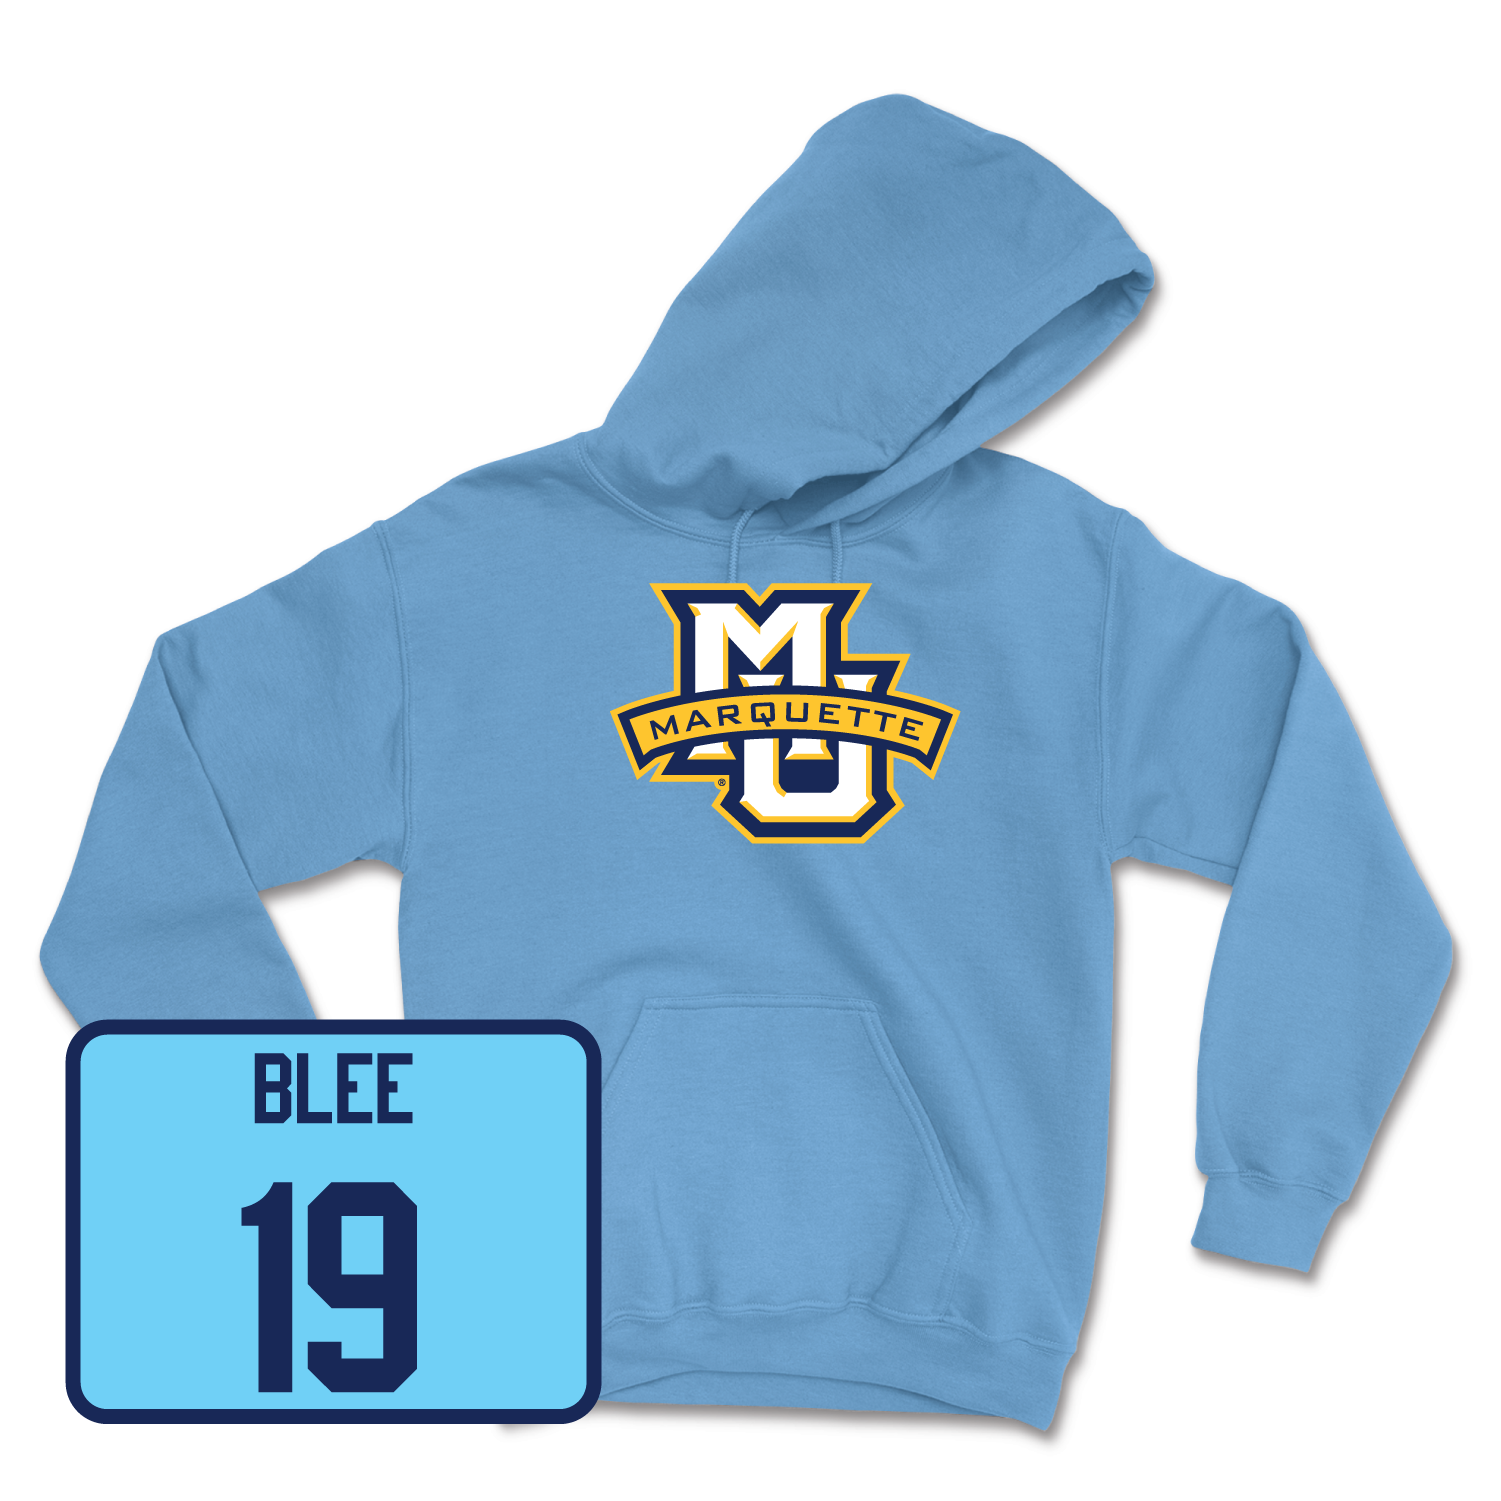 Championship Blue Women's Lacrosse Marquette Hoodie 2 X-Large / Mary Blee | #19